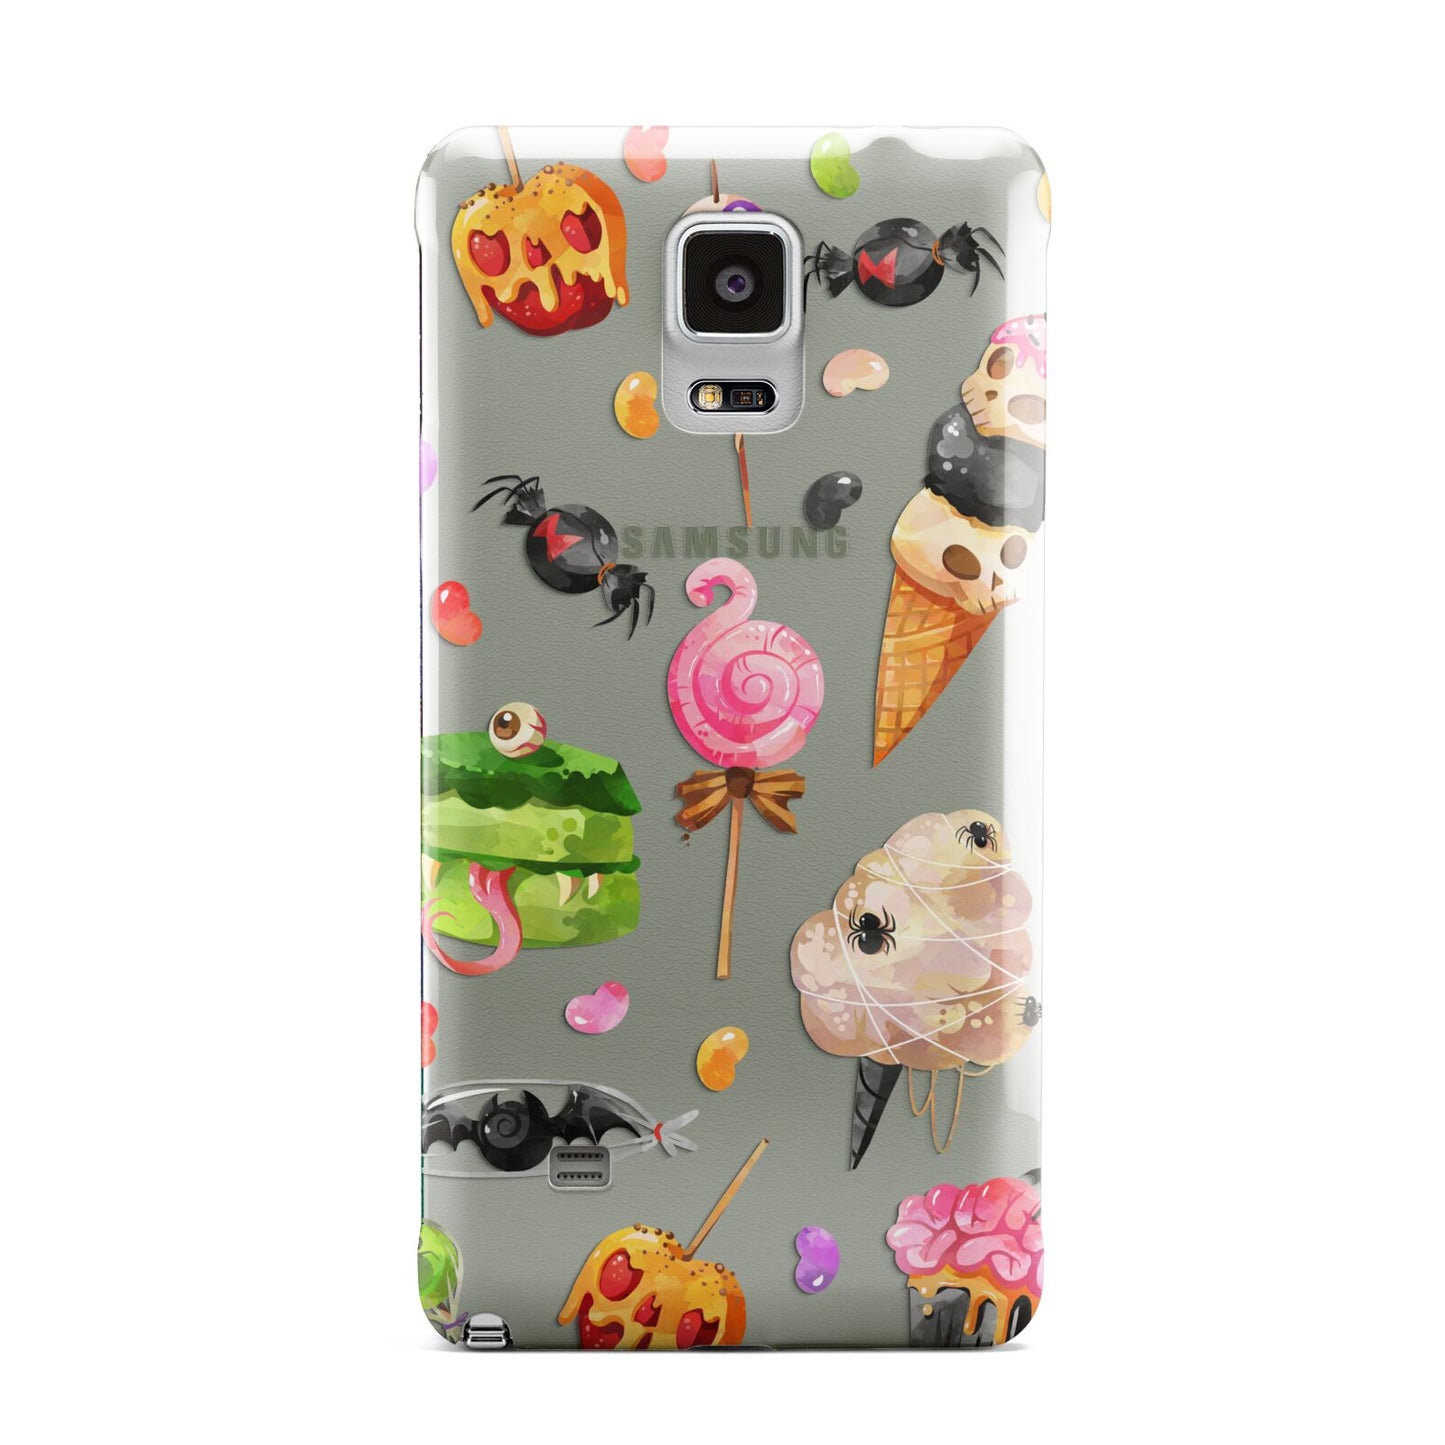 Halloween Cakes and Candy Samsung Galaxy Note 4 Case